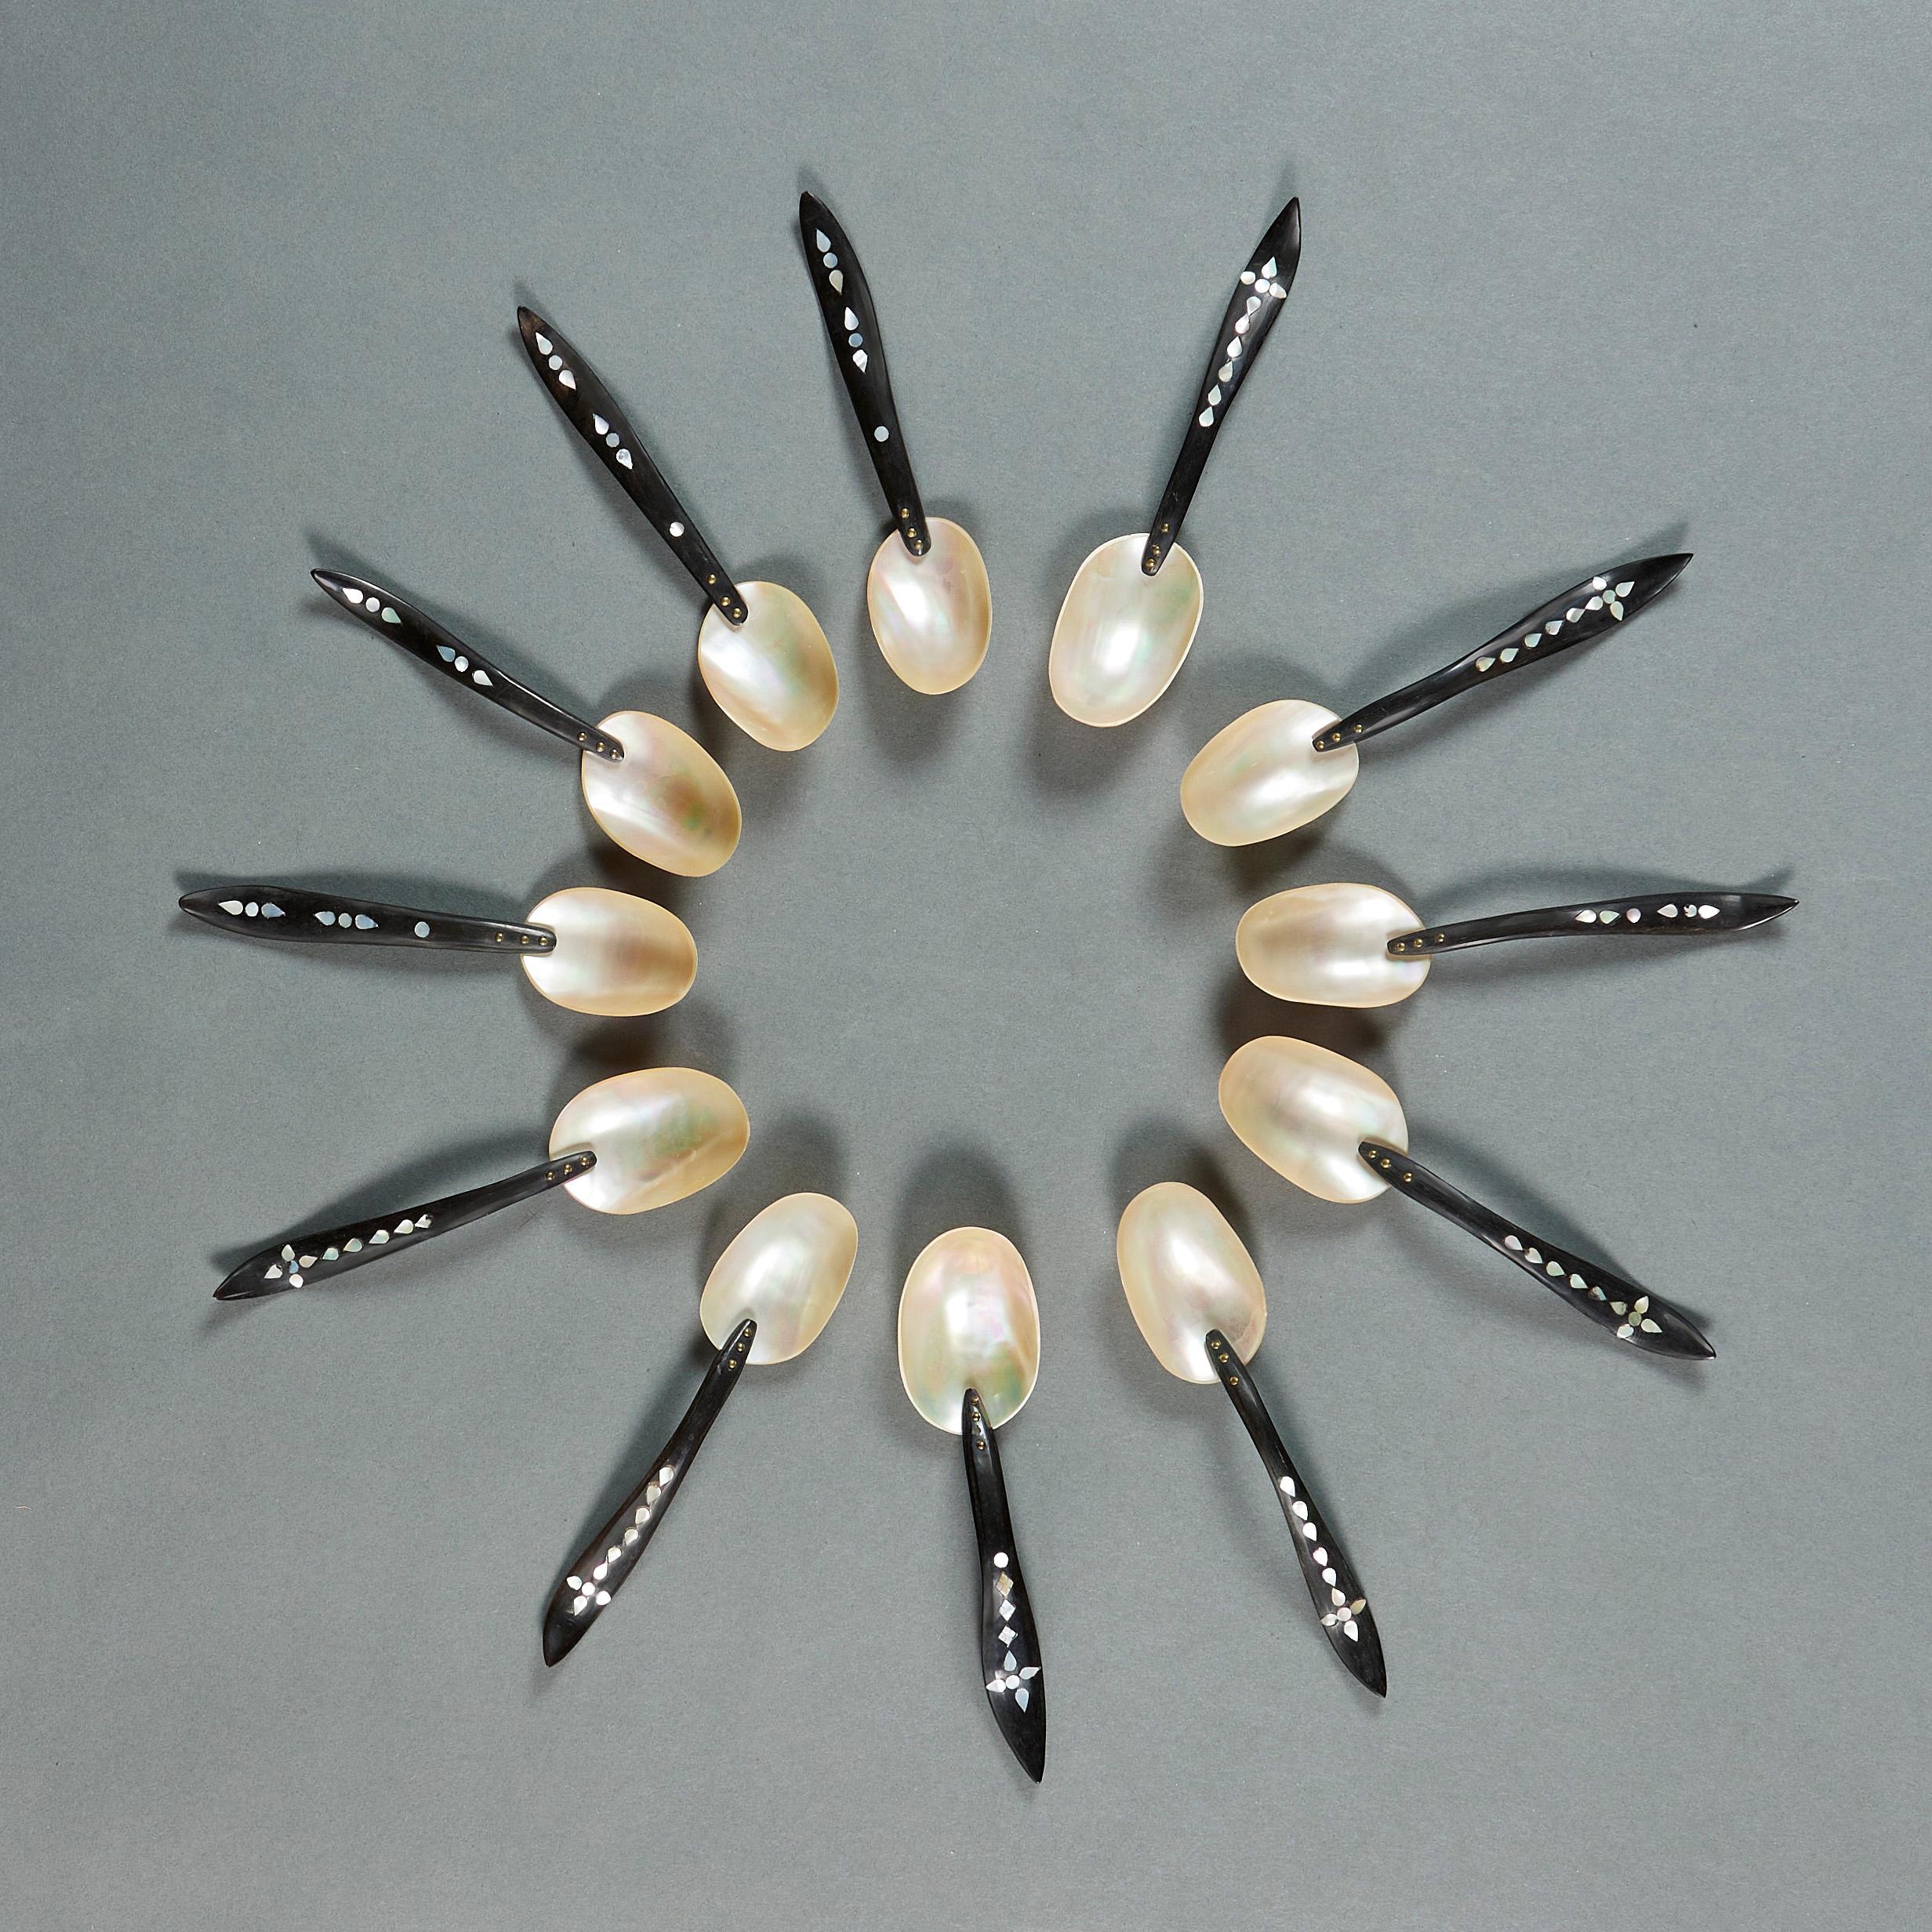 Ottoman, circa 1920

A set of twelve mother of pearl spoons, with ebonised handles inlaid with mother of pearl.

Measures: Length 20.05cm
Width 5.00cm.